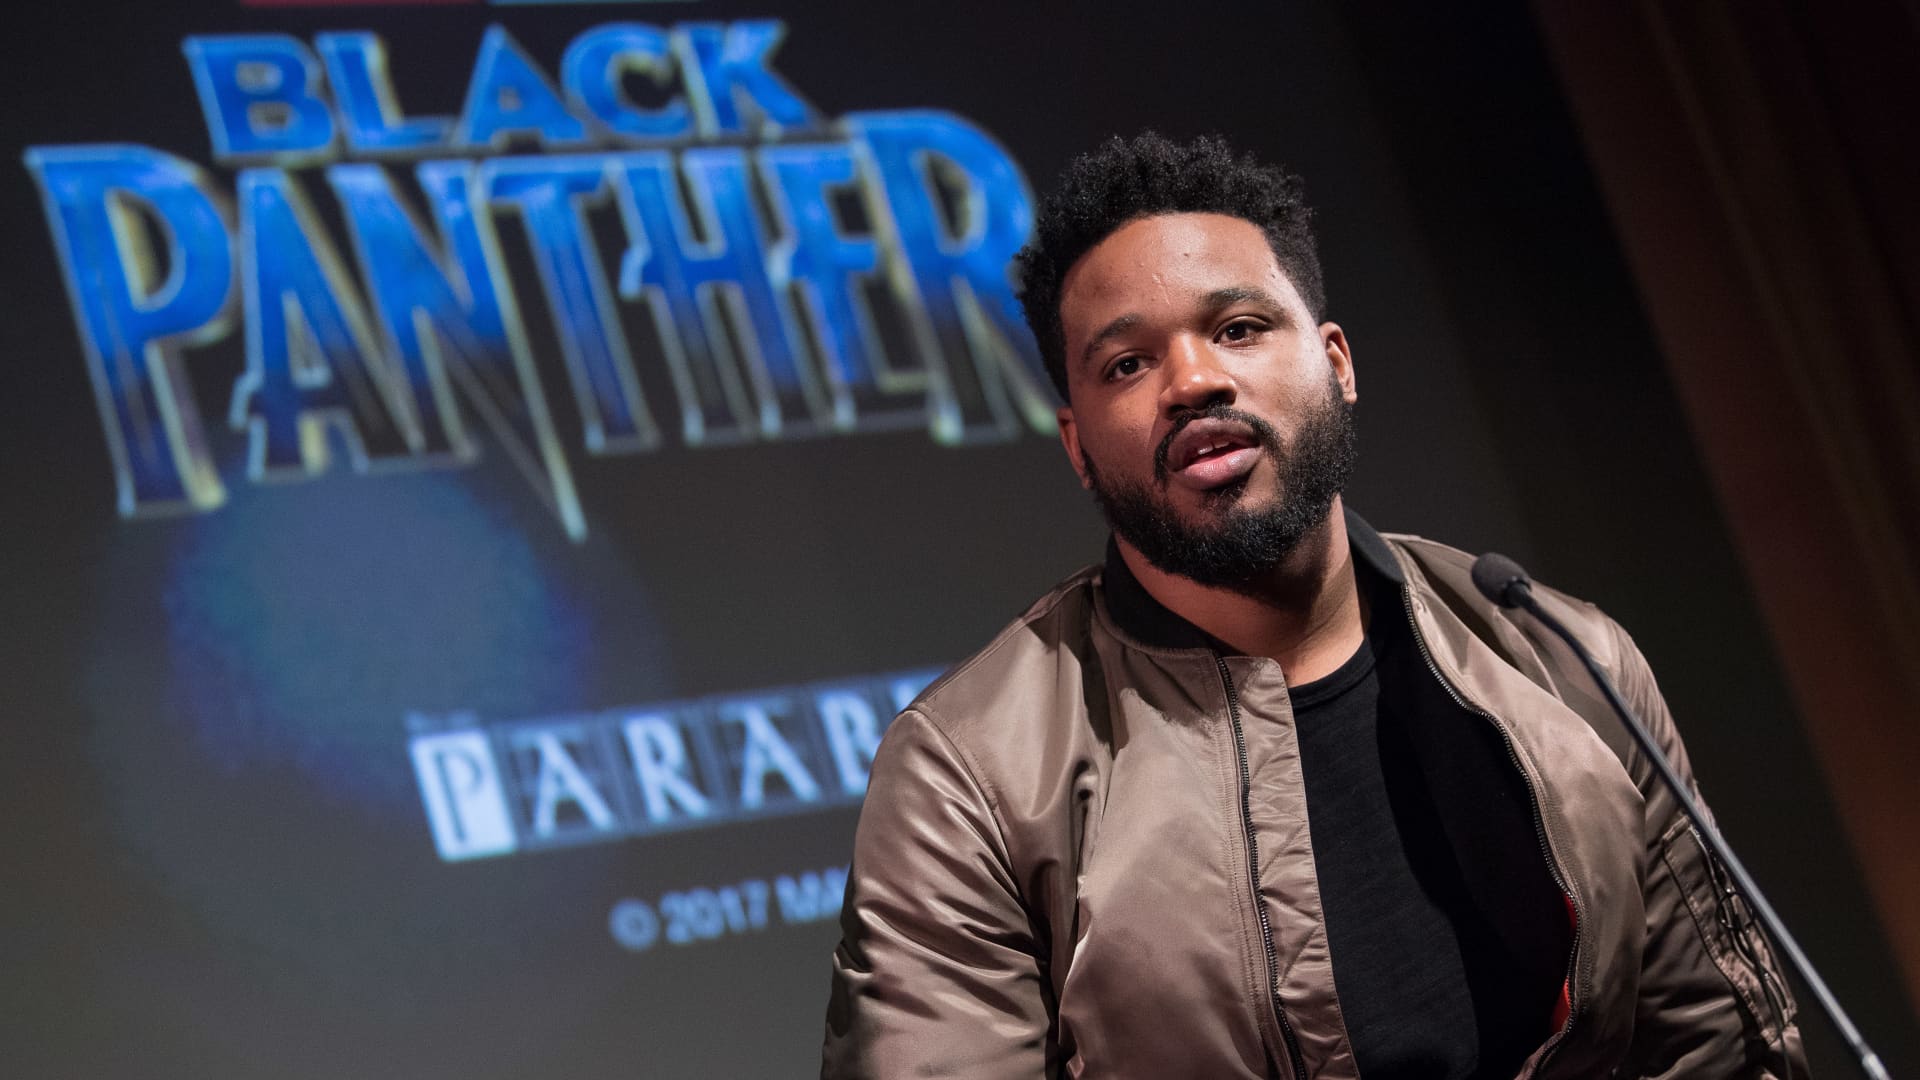 Director Ryan Coogler attends the 'Black Panther' BFI preview screening held at BFI Southbank on February 9, 2018 in London, England.